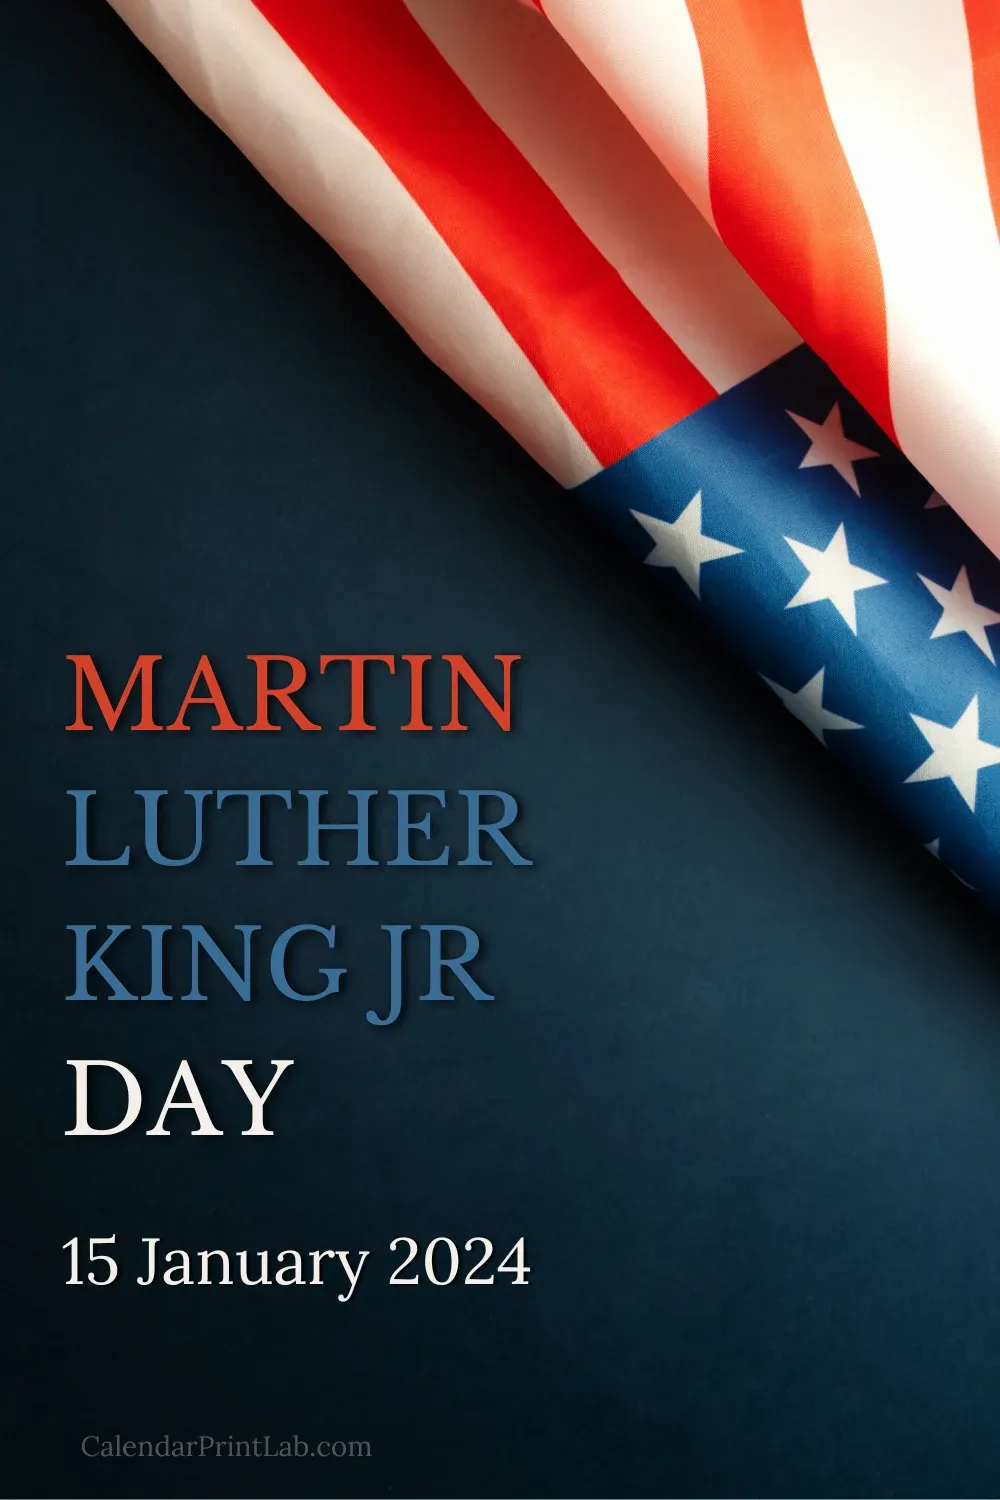 Martin Luther King Day 2024 HD Image